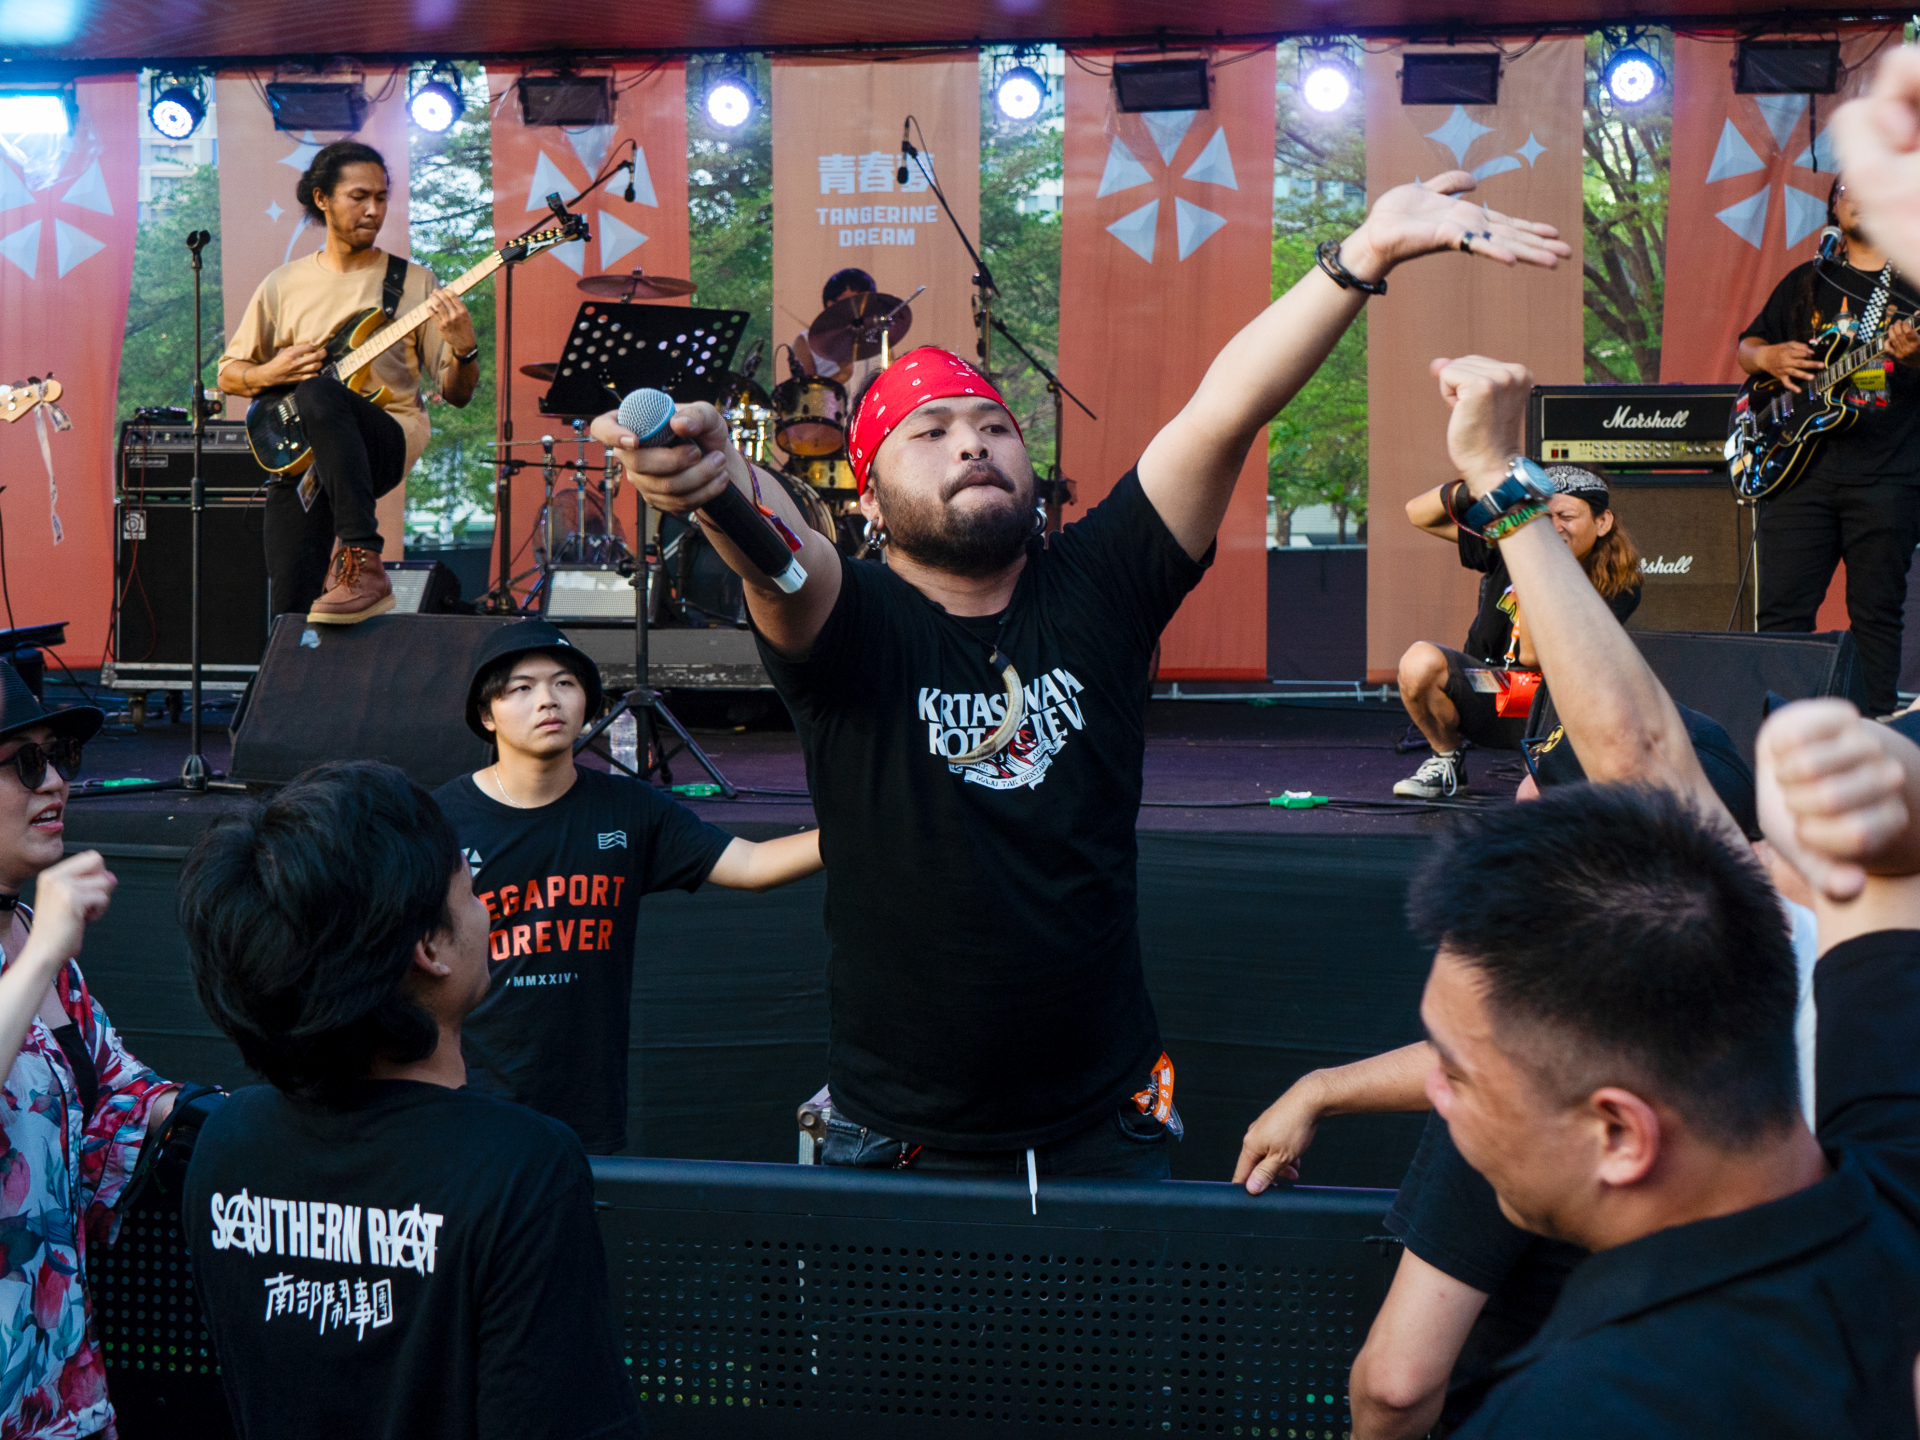 Indonesian band takes stand for Taiwan’s migrant workers – Al Jazeera English "working in taiwan" – Google News